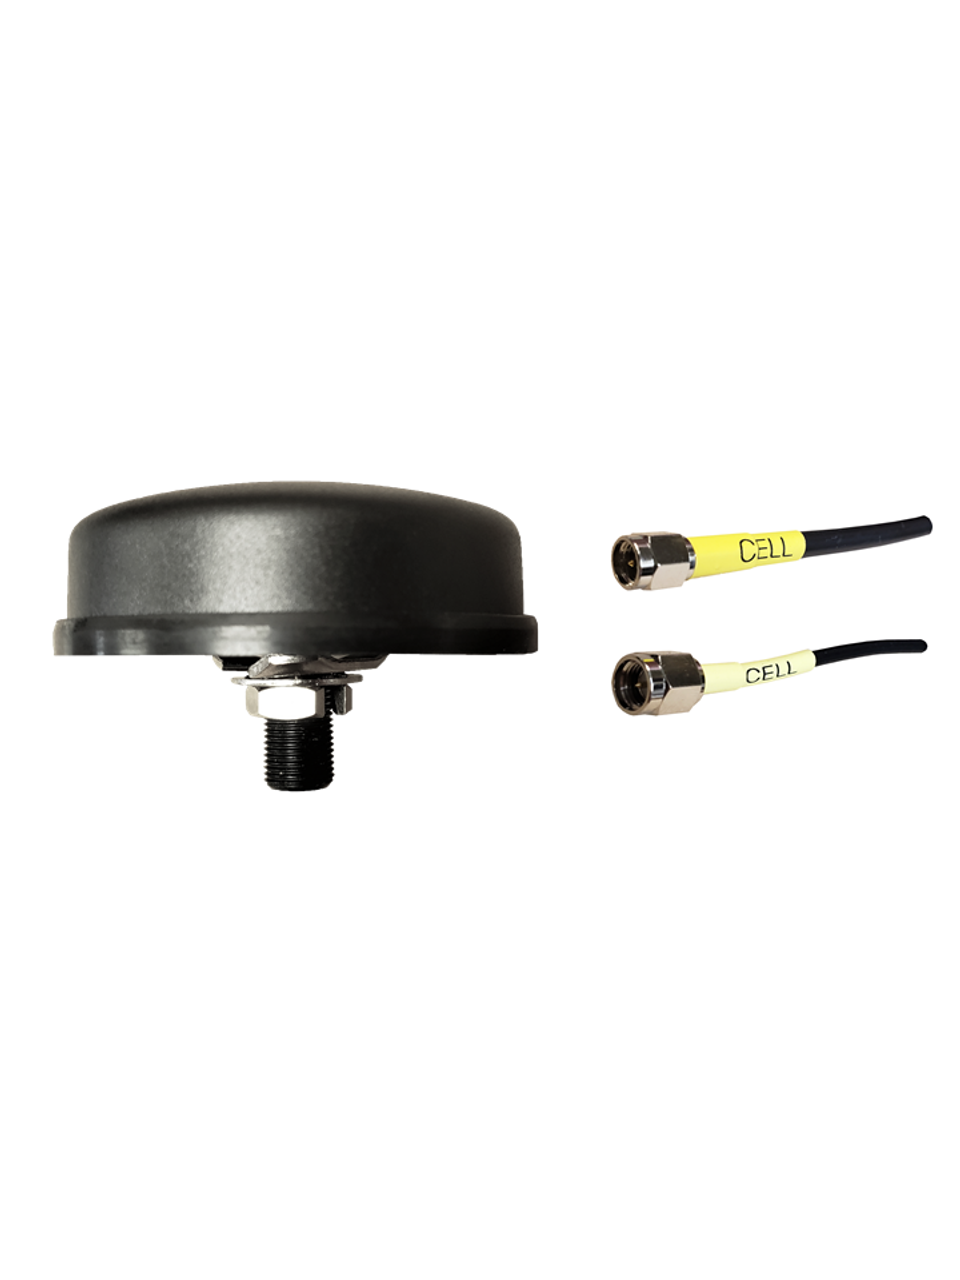 M46B 2-Lead MIMO Cellular 3G 4G 5G LTE Bolt Mount M2M IoT Antenna for BEC MX-210 Router